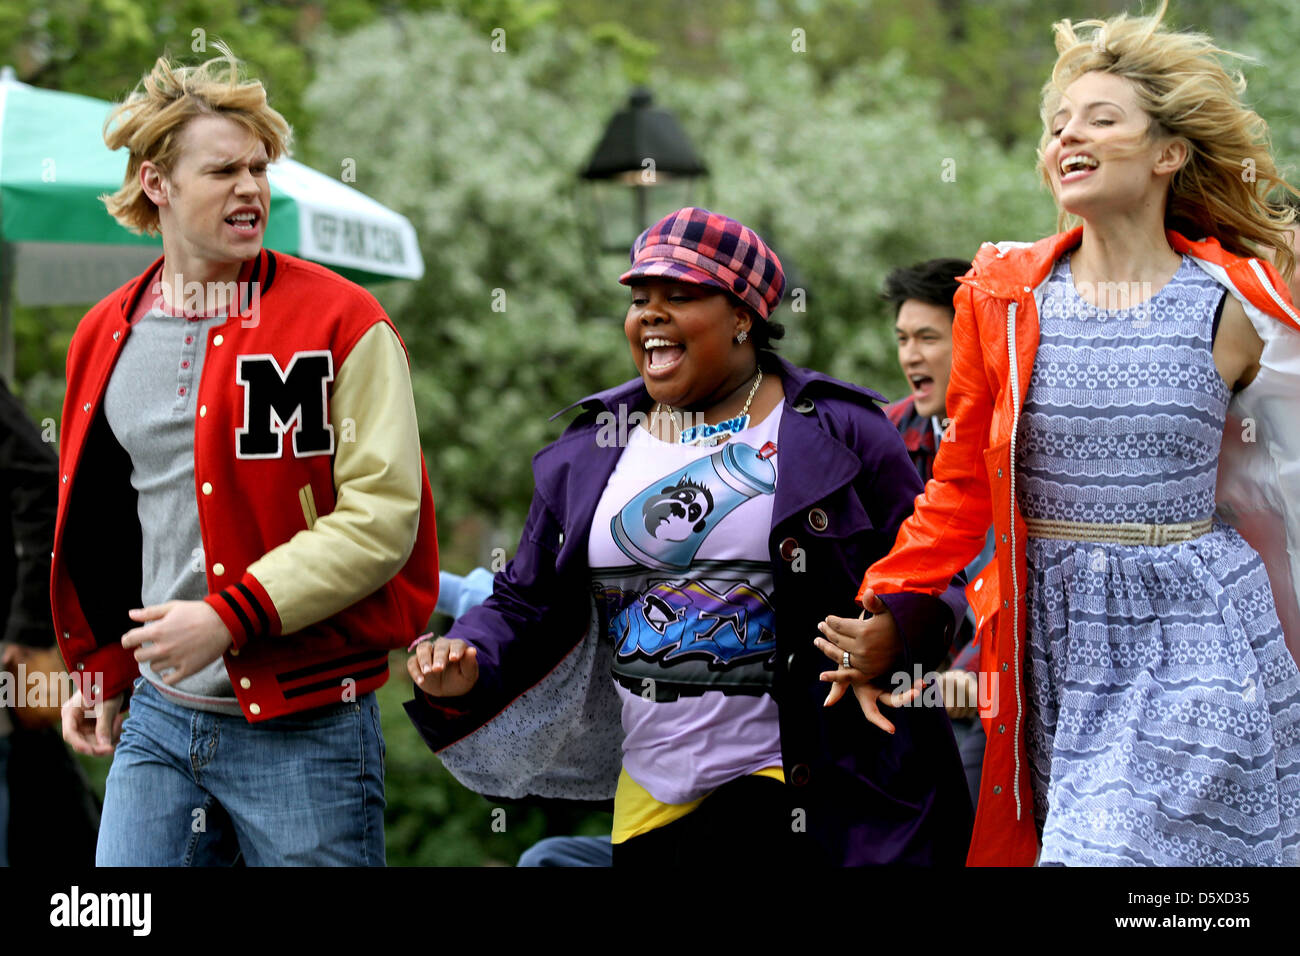 Amber Riley, Dianna Agron Cast of 'Glee' is seen filming in Washington  Square Park New York City, USA - 29.04.11 Stock Photo - Alamy